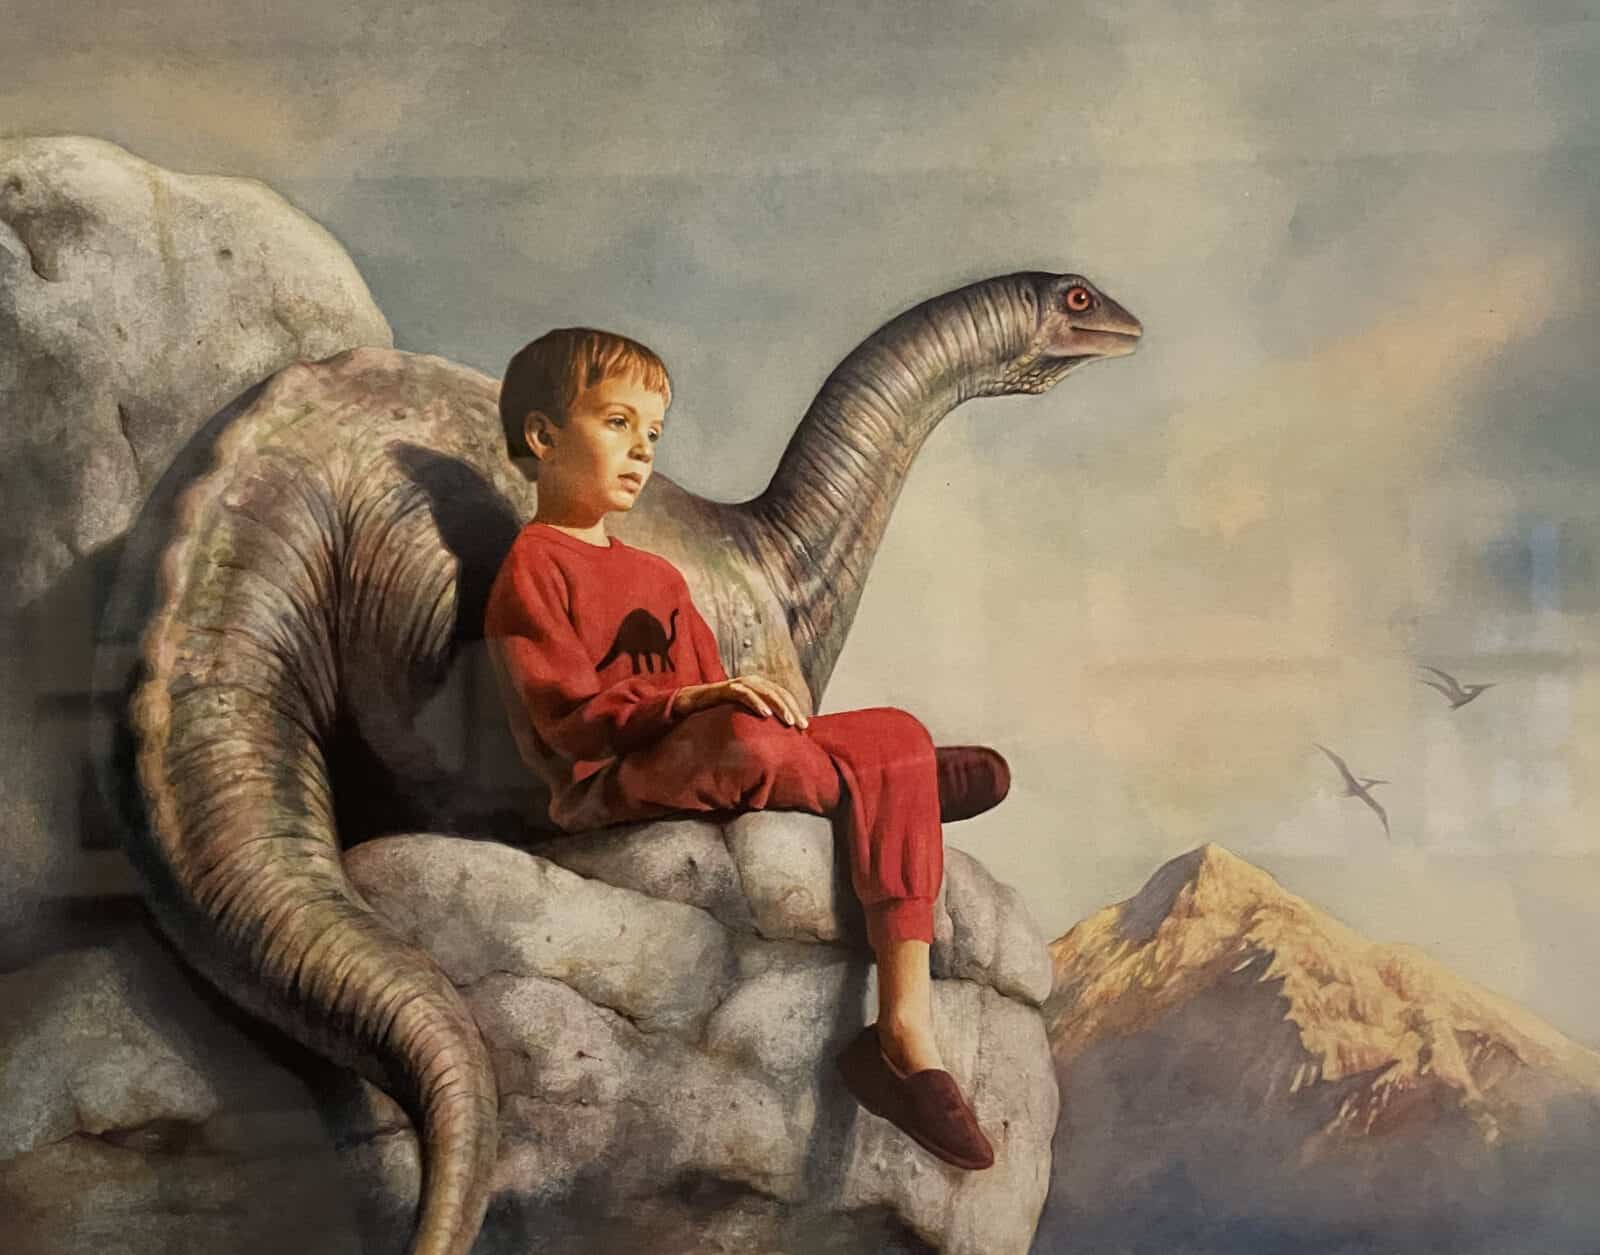 A boy and a baby apatosaurus sit together on a rock in the sun in Dennis Nolan's Dinosaur Dream. Press image courtesy of the Norman Rockwell Museum